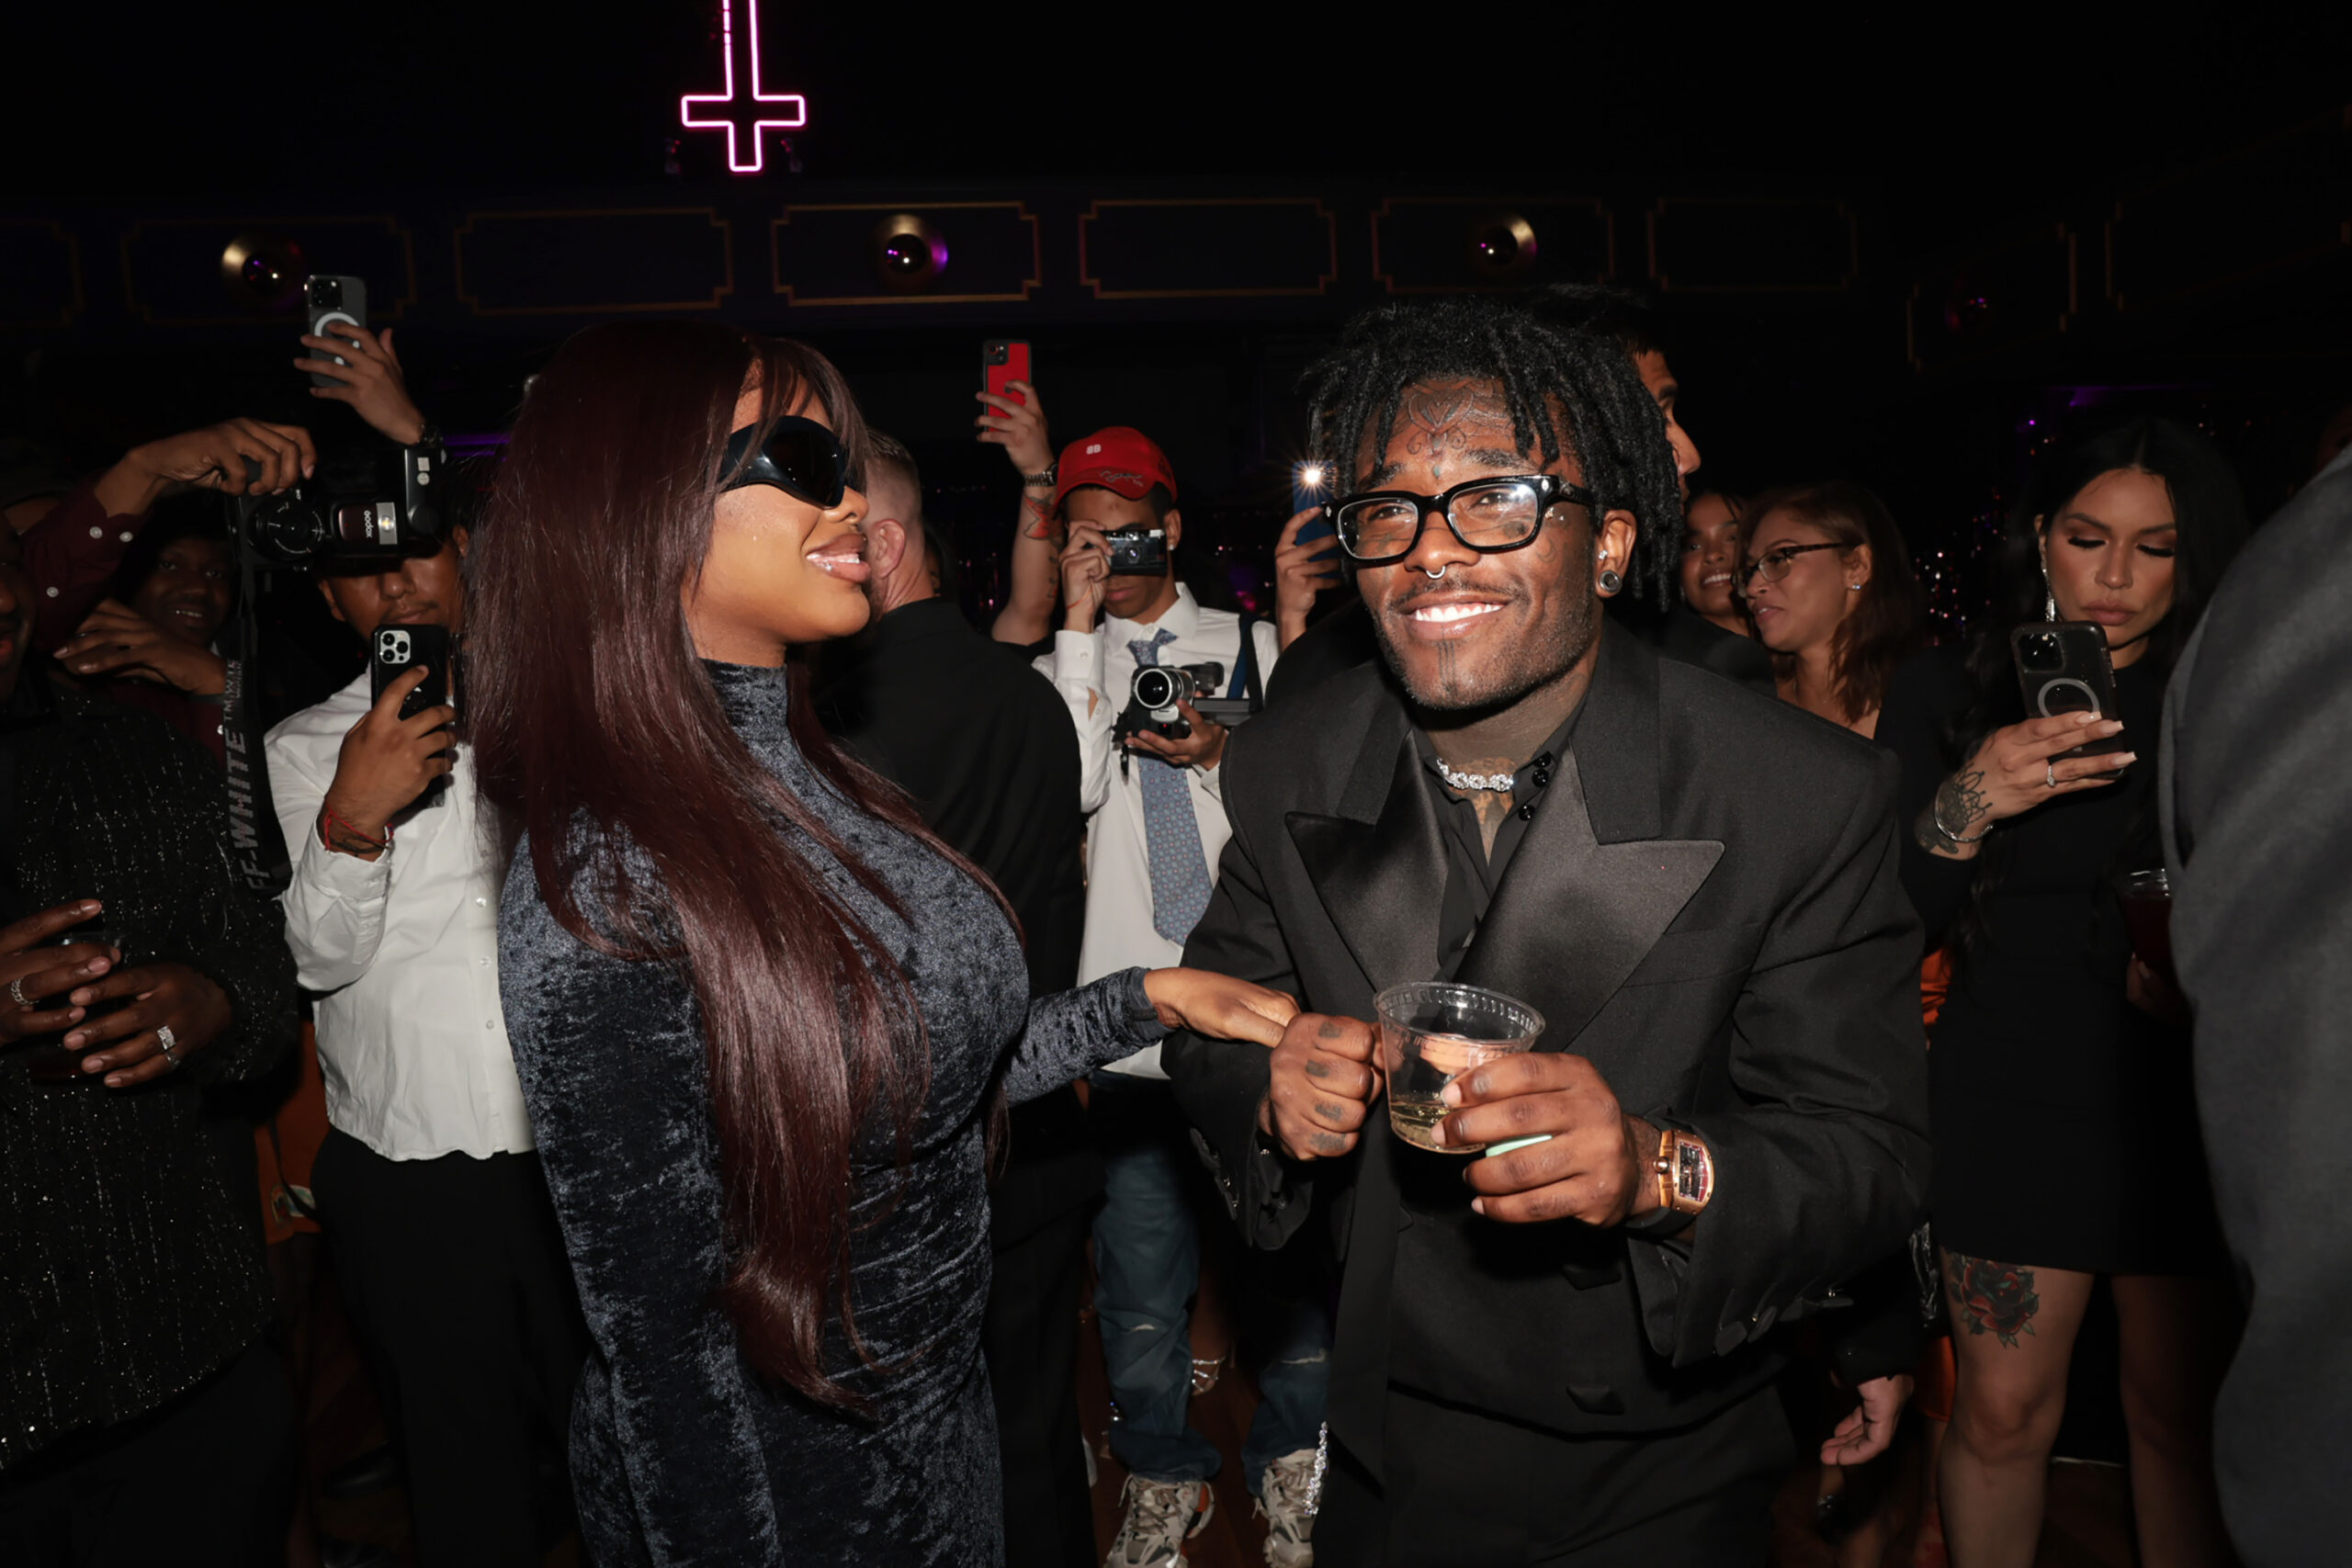 Rolling Ray Labels JT “The Man” In Her Relationship With Lil Uzi Vert